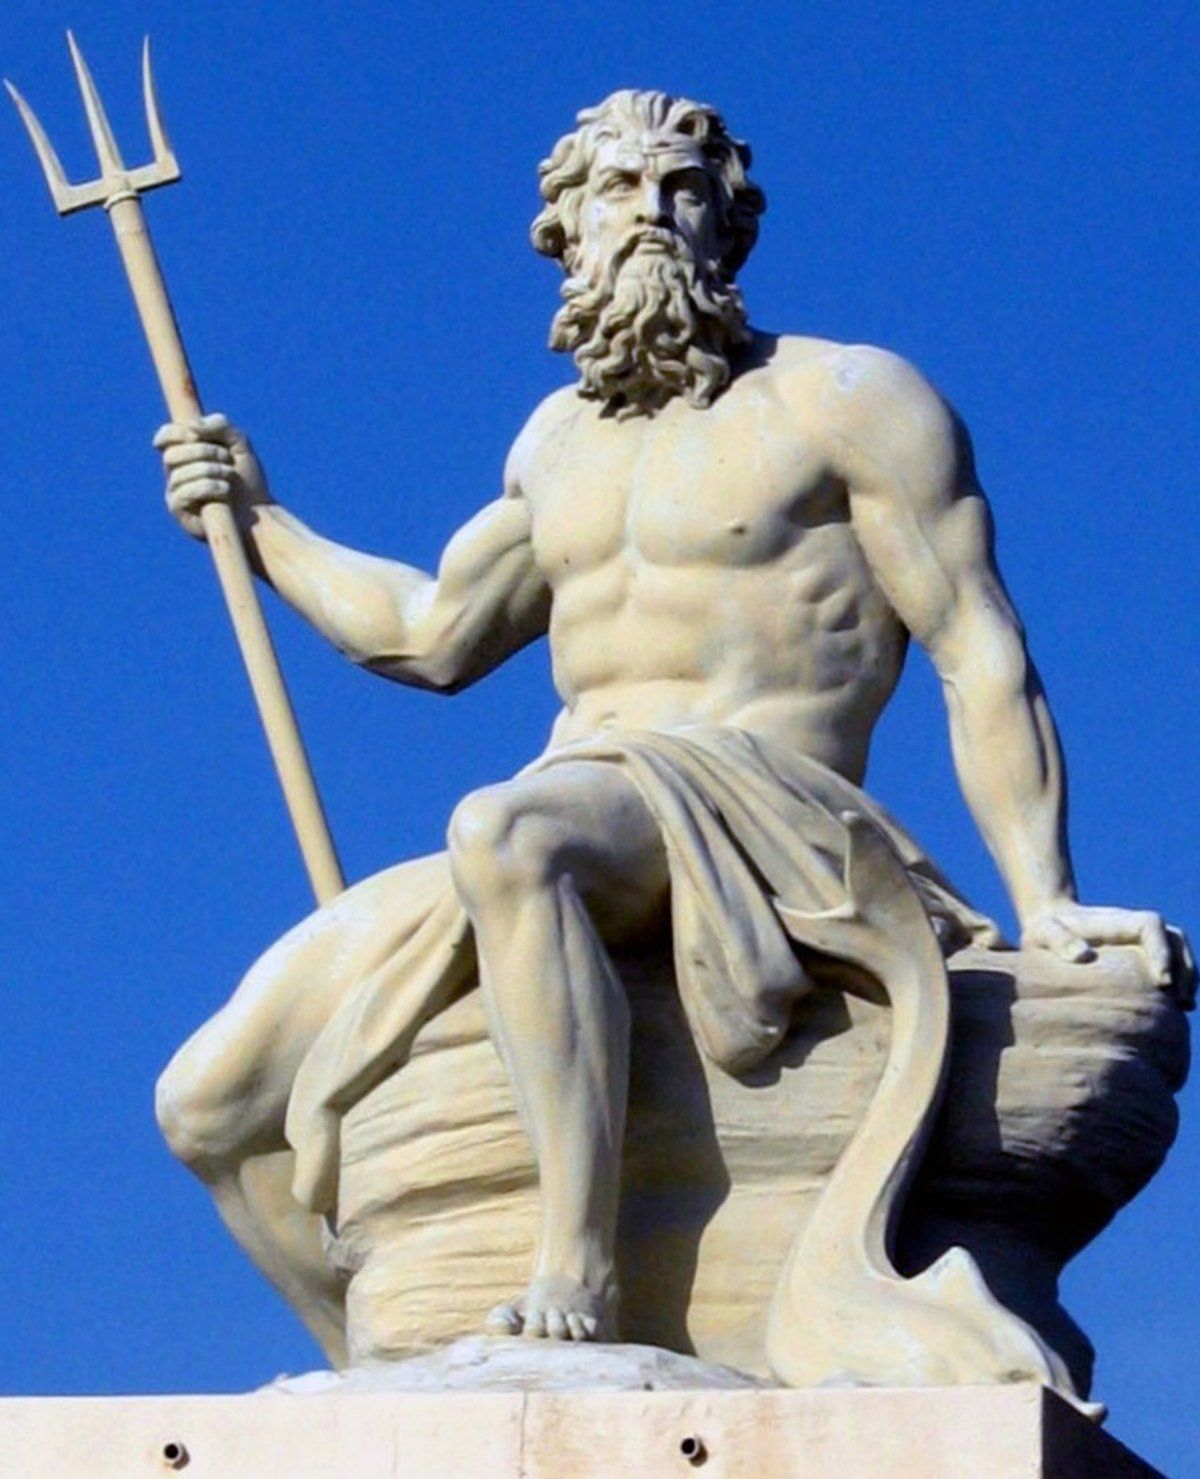 A statue of a man holding a trident against a blue sky,  representing Poseidon. 